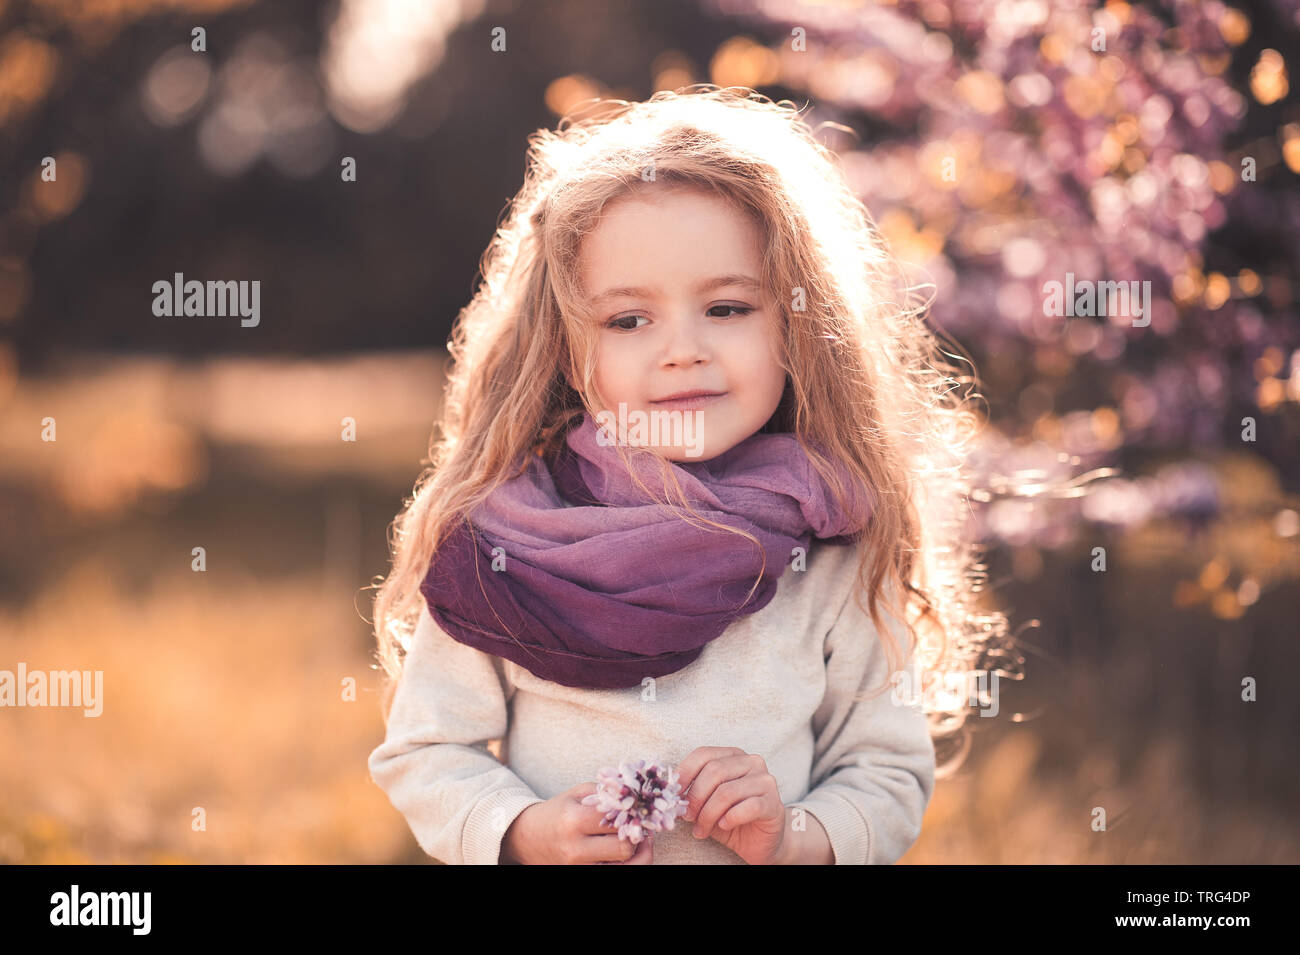 Cute baby girl 3-4 year old holding flower wearing stylish clothes ...